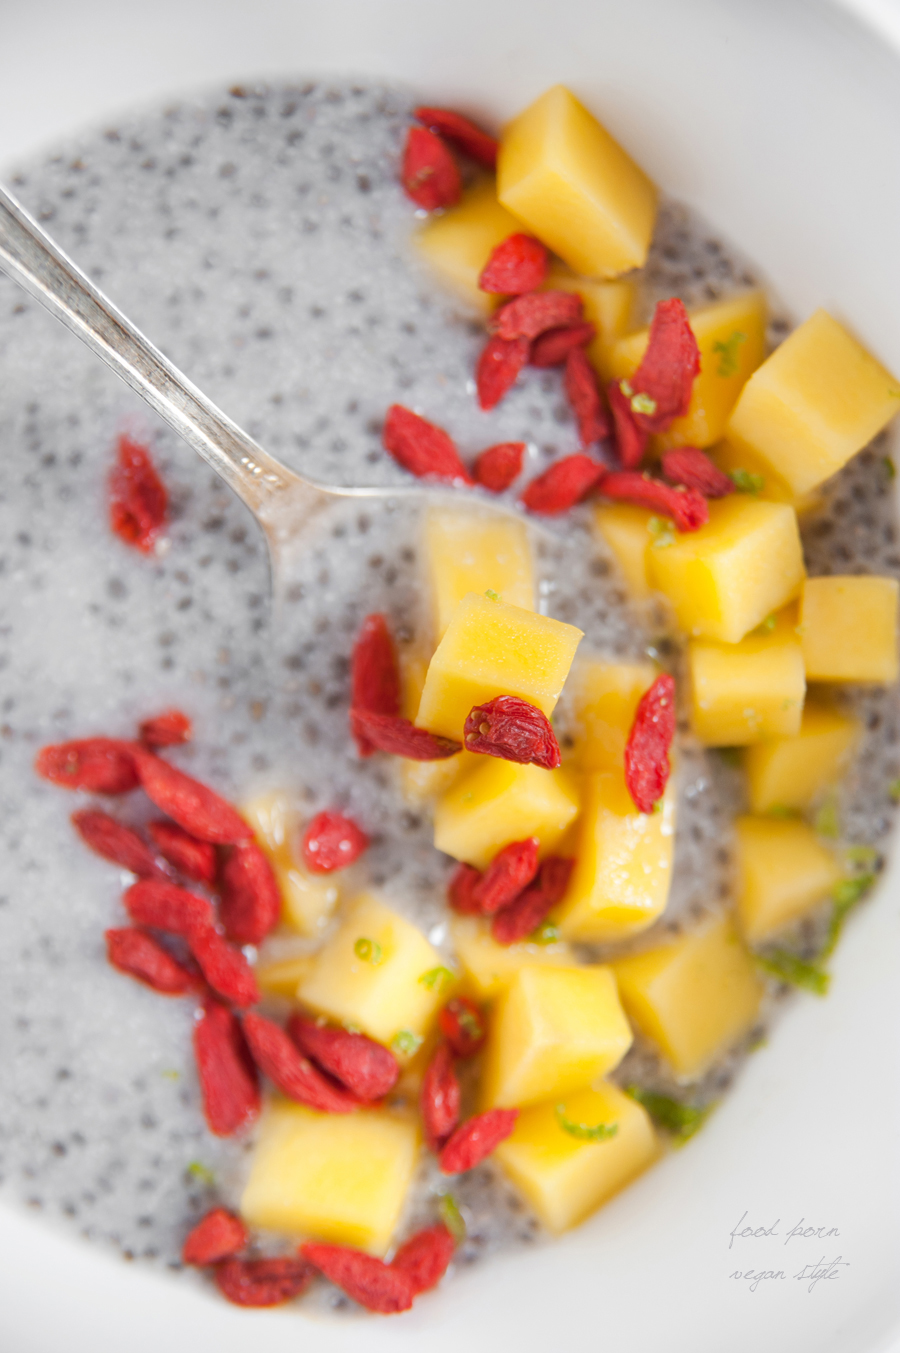 Chia pudding with young coconut meat and mango